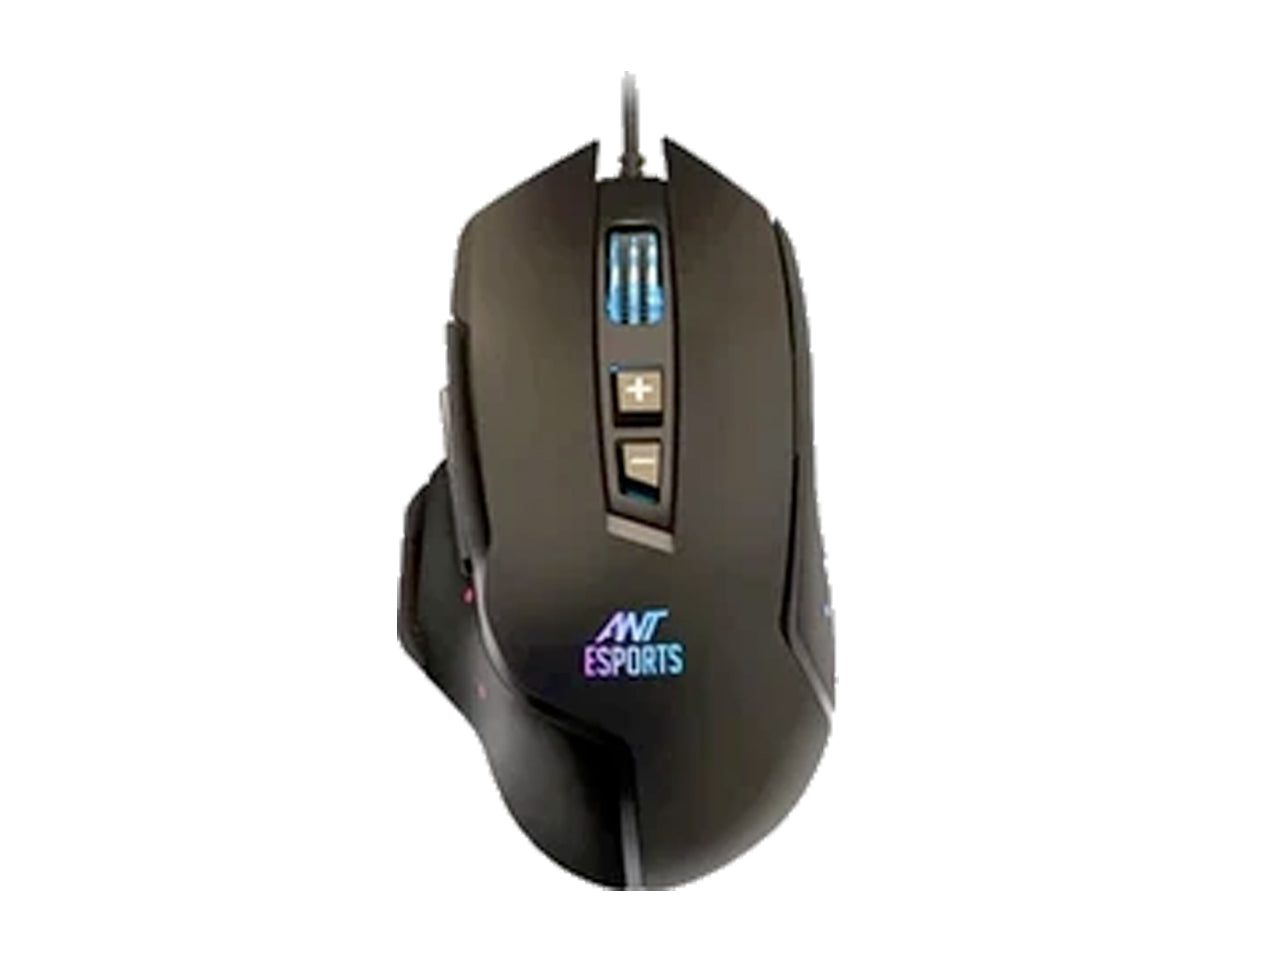 Ant Esports GM300 RGB Gaming Mouse